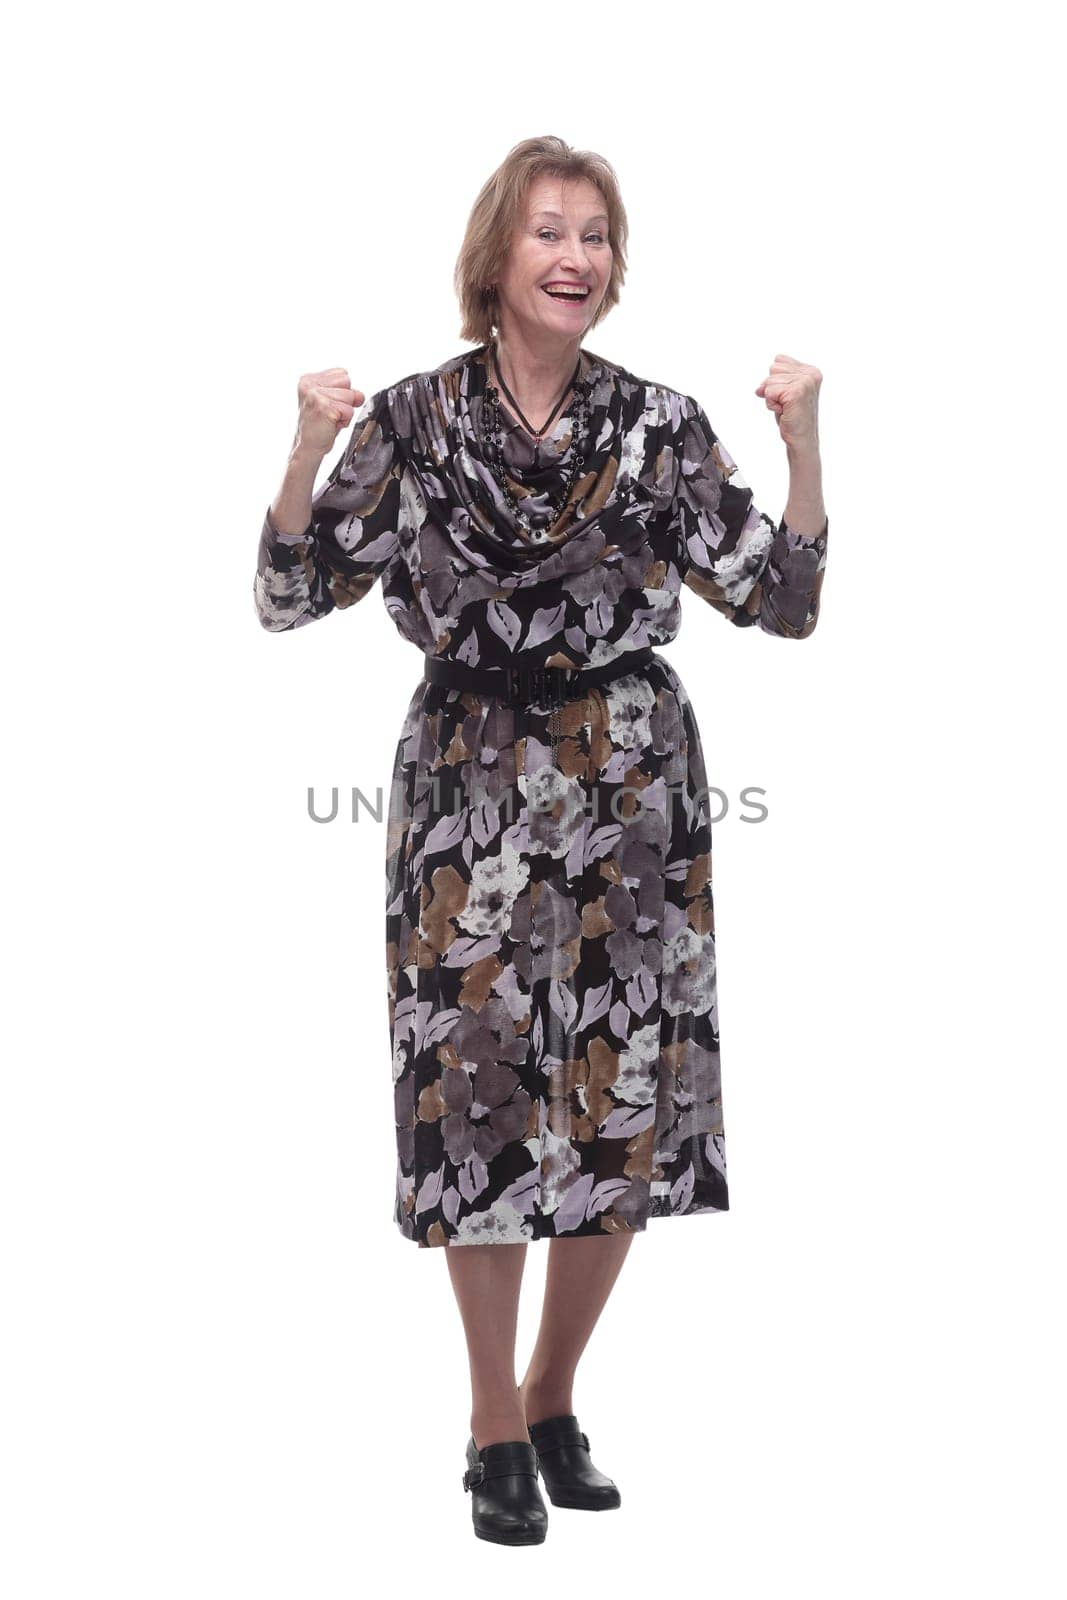 Old adult glad excited cheerful lady smiling, laughing, screaming, raising hands, opened mouth by asdf